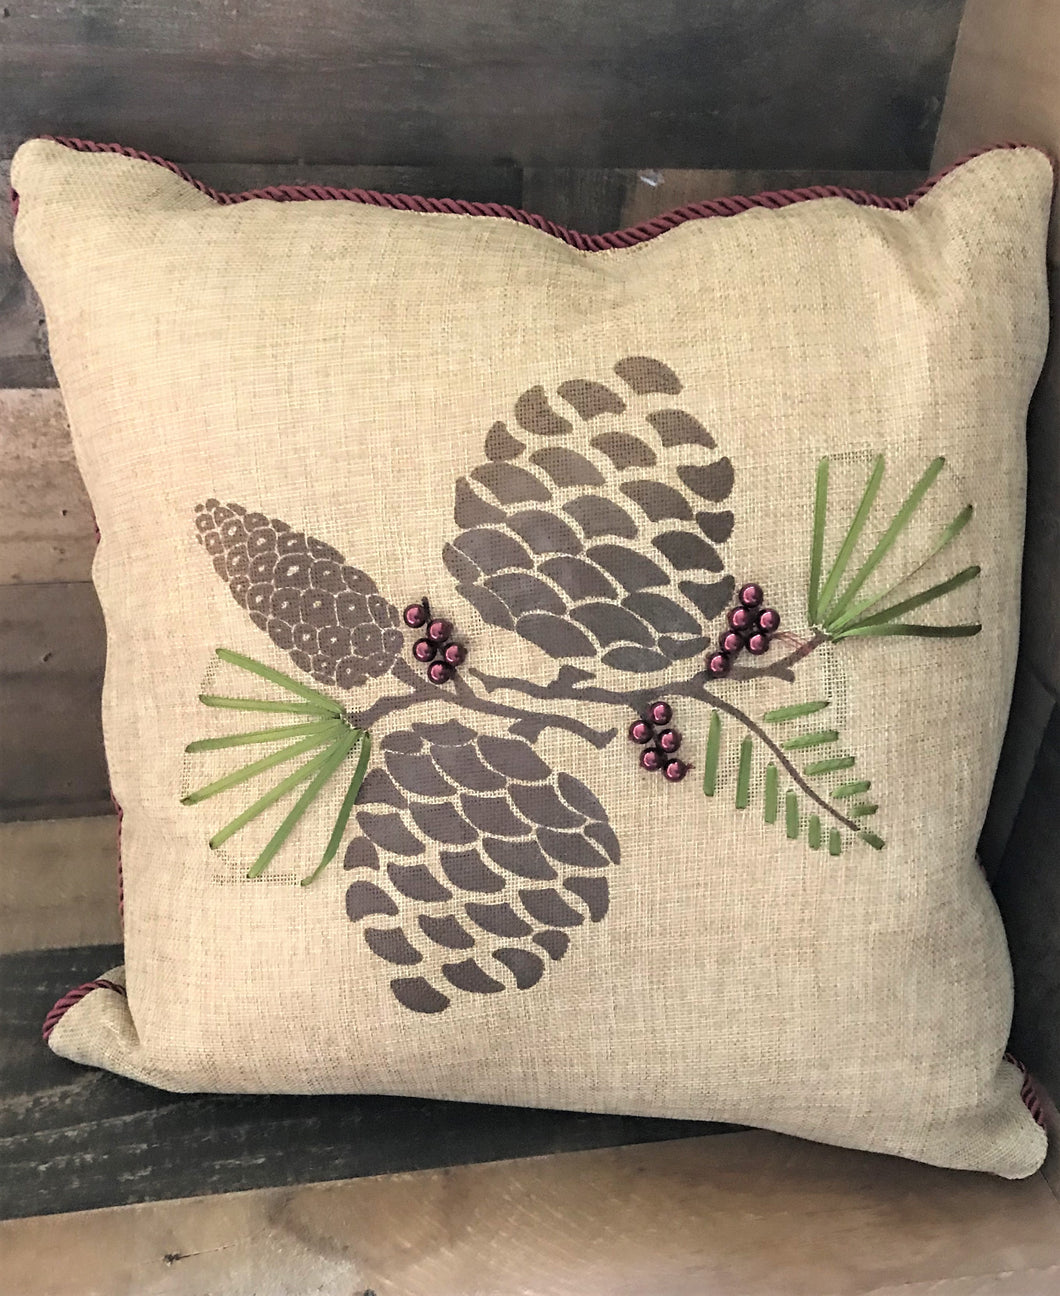 BERRY PRETTY 3-D PINE CONES AND BERRIES THROW PILLOW